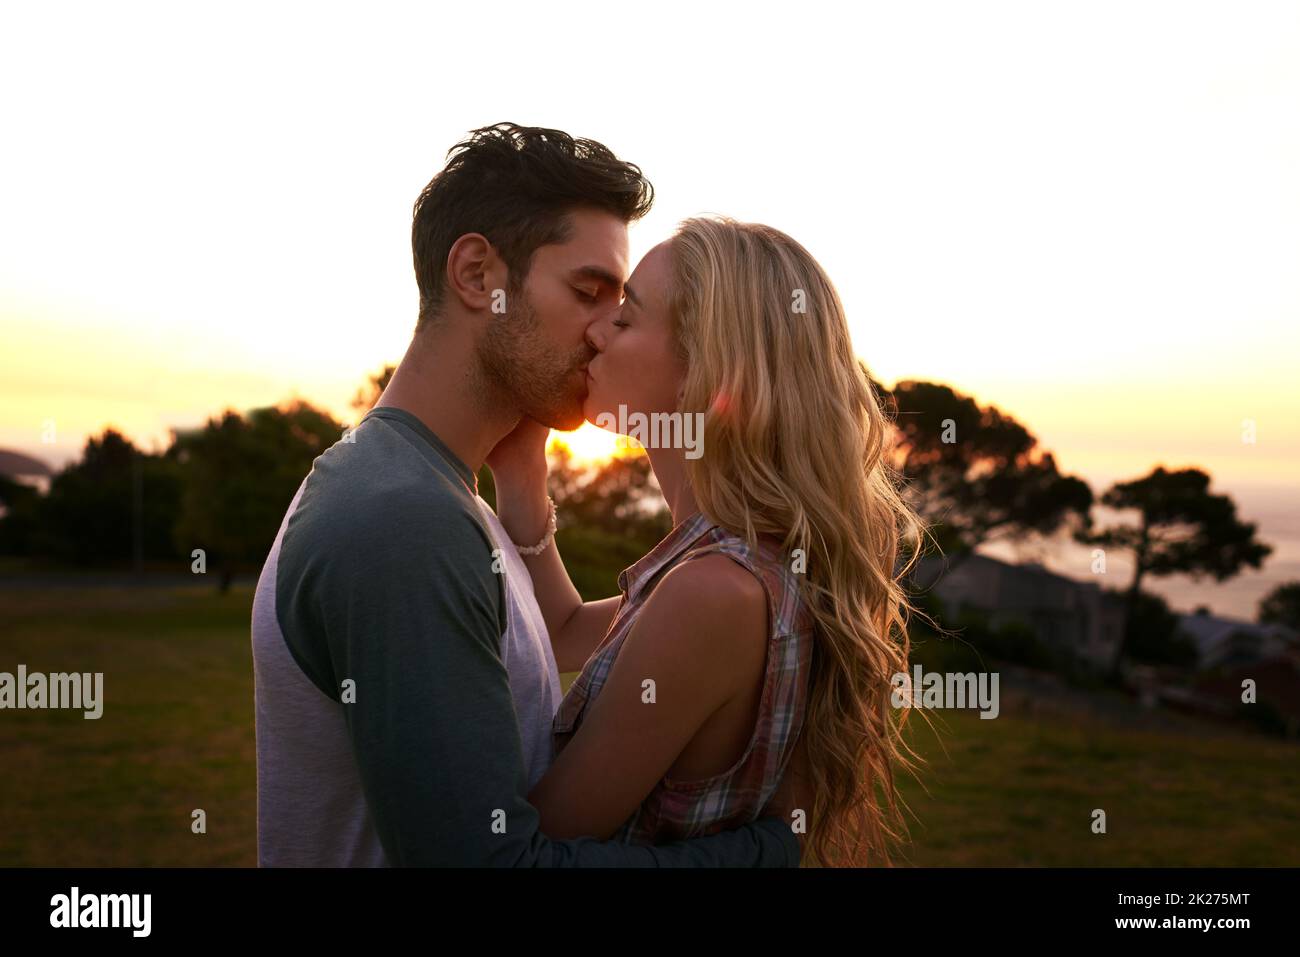 Smooches at sunset. Cropped shot of an affectionate young couple outdoors. Stock Photo